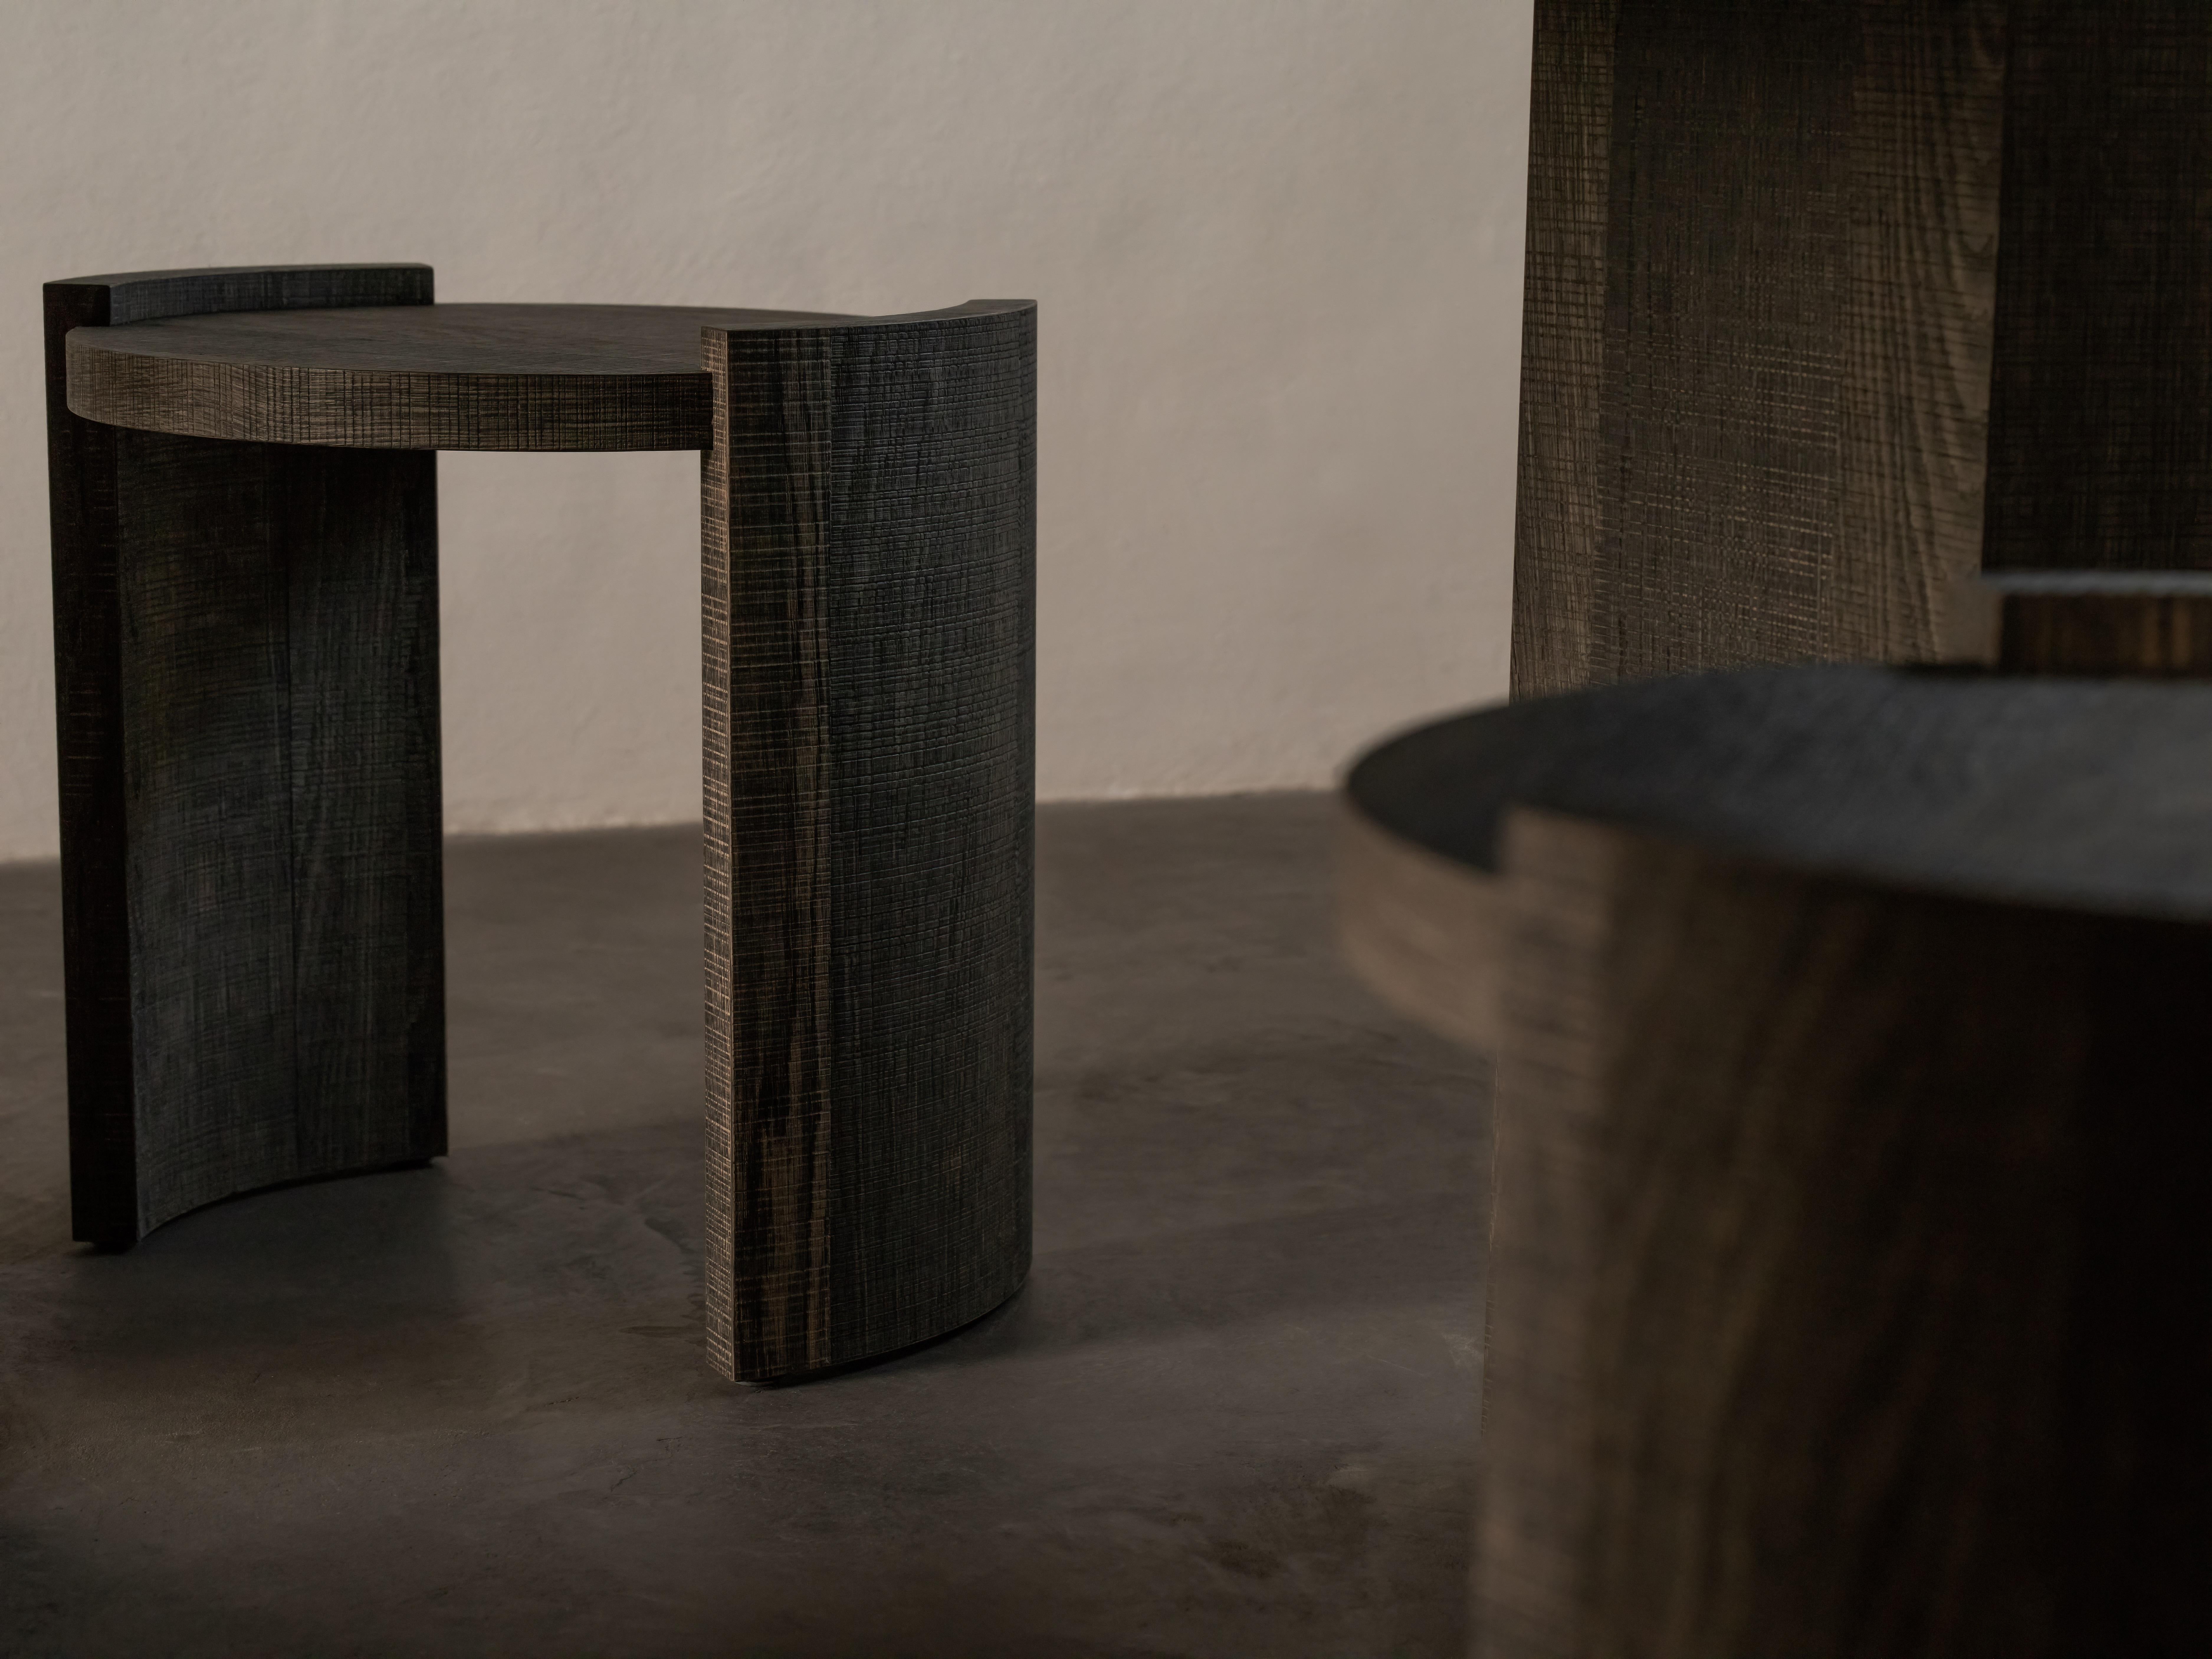 Hiku stool by Kana Objects
Dimensions: D 45 x H 45 cm
Materials: Smoked oak.
Available in other sizes and with cushion options.
Also available in natural oak.

Tables of different heights and materials can be combined to form a harmonious